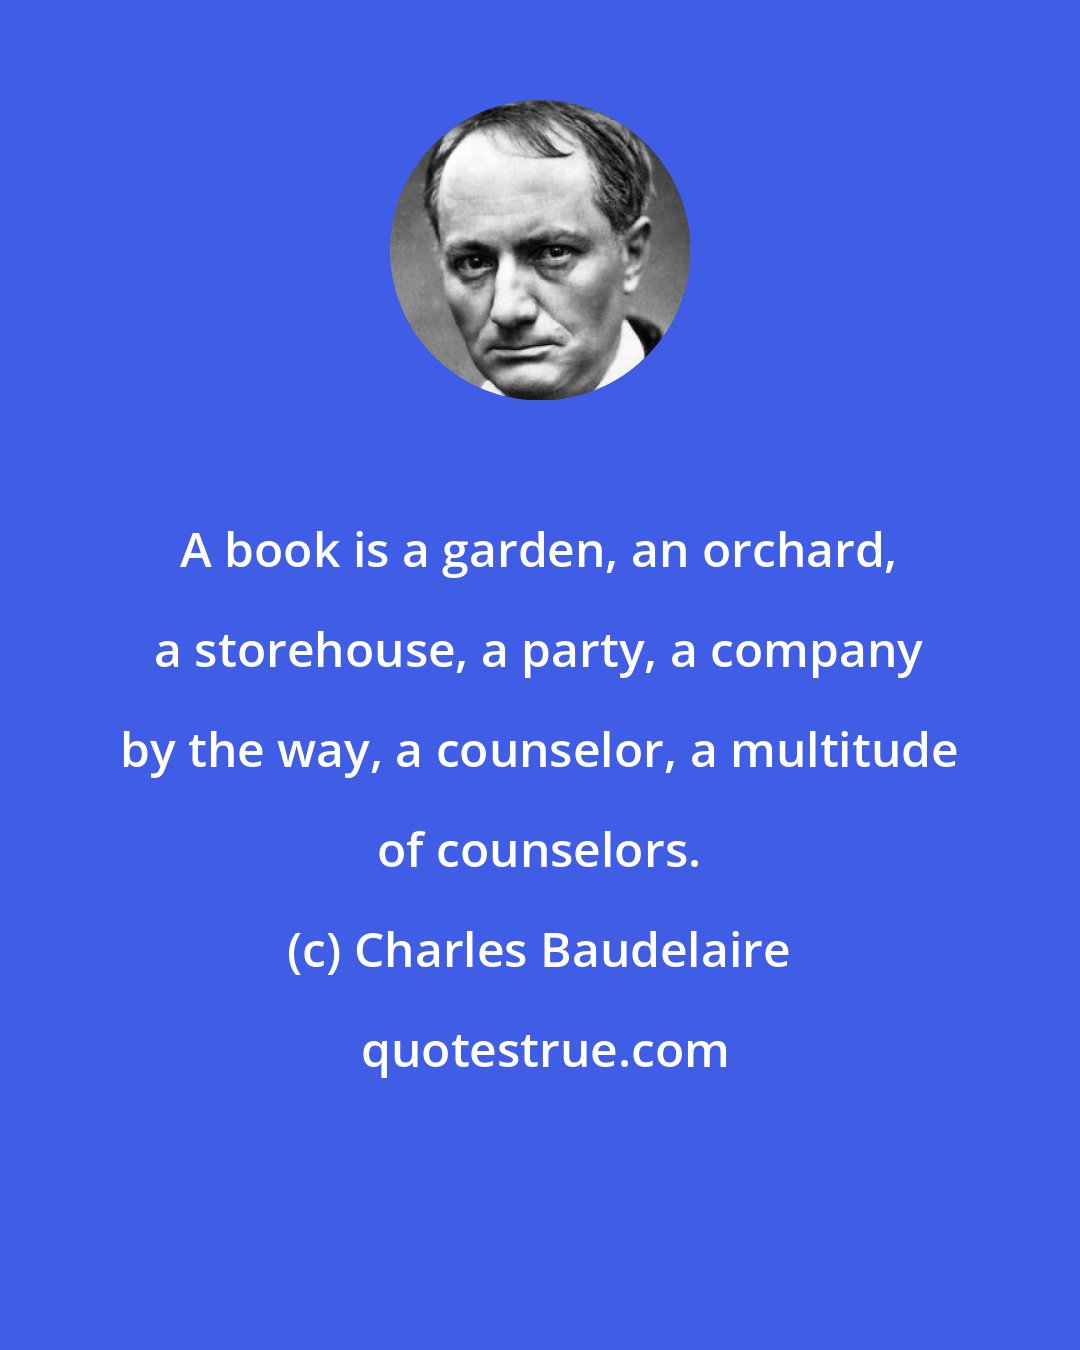 Charles Baudelaire: A book is a garden, an orchard, a storehouse, a party, a company by the way, a counselor, a multitude of counselors.